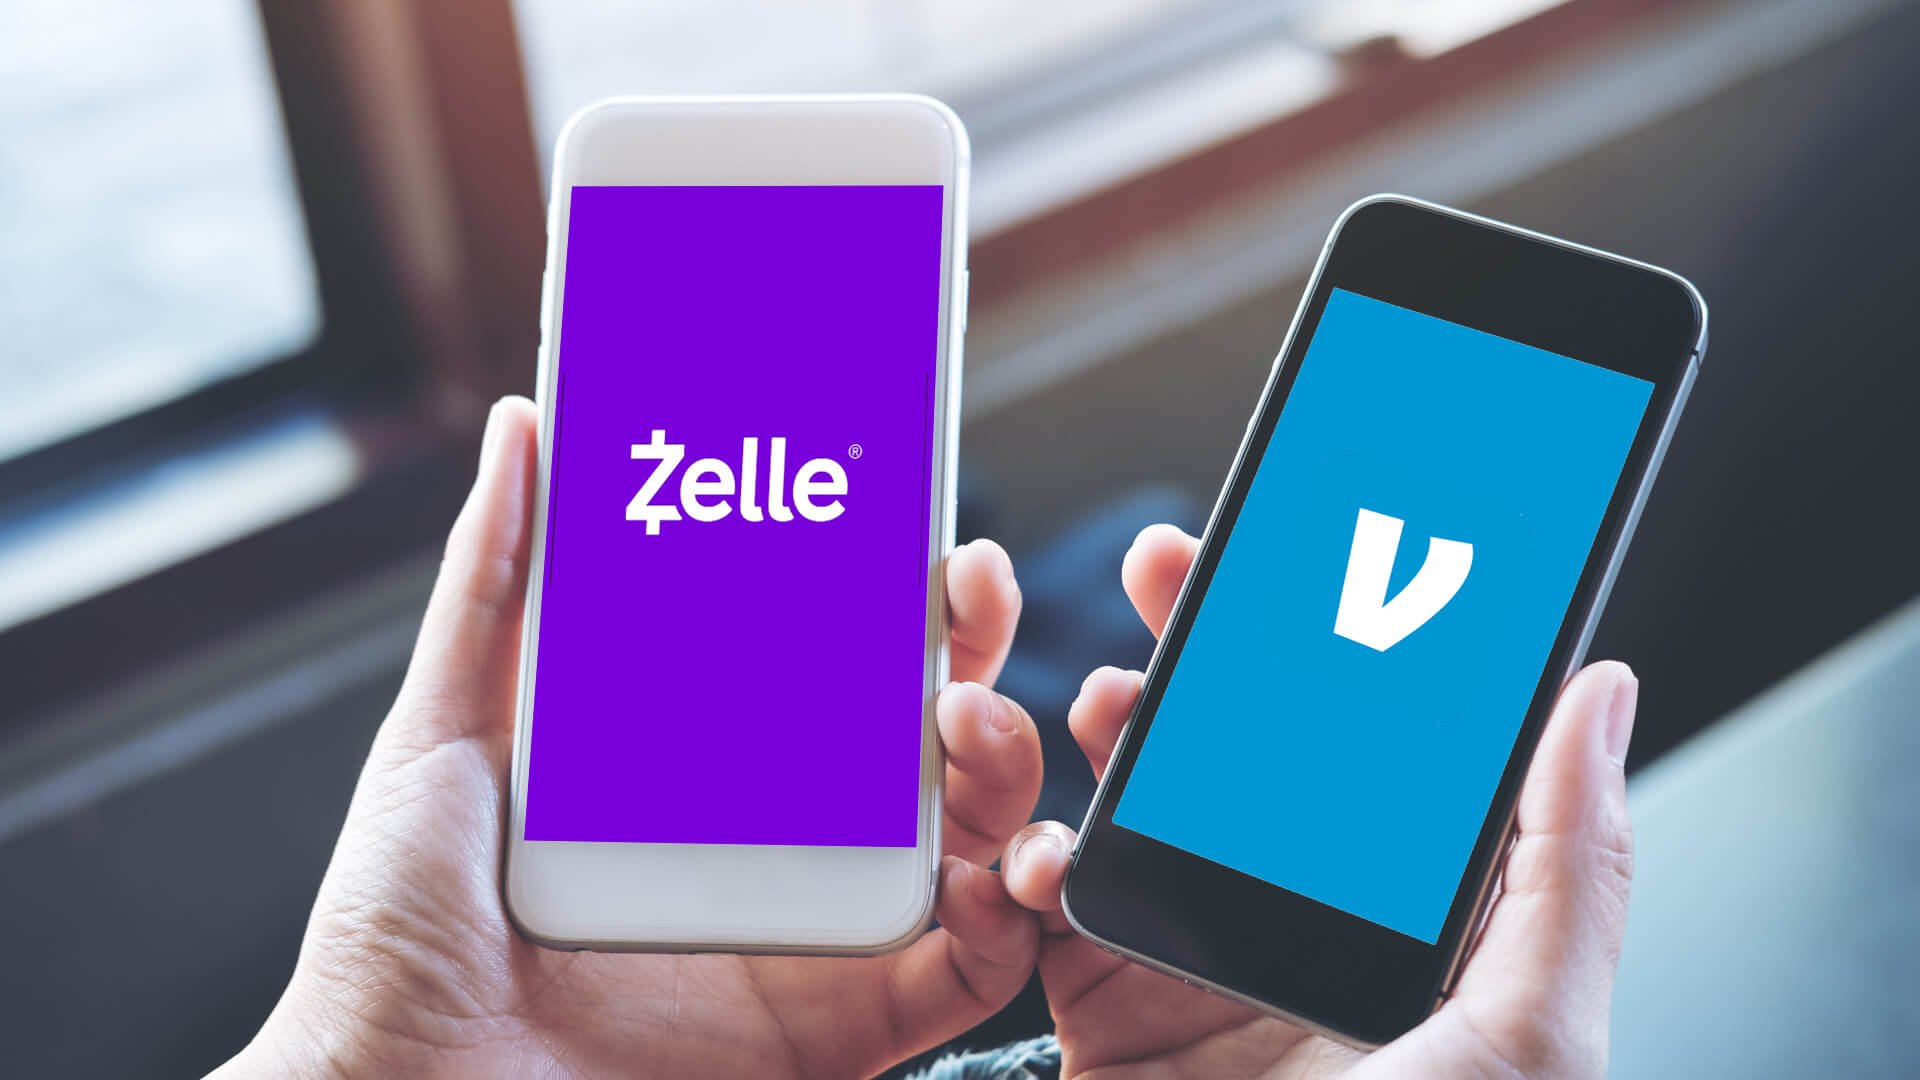 Venmo Is Riddled with Scams – Is Zelle Any Safer?